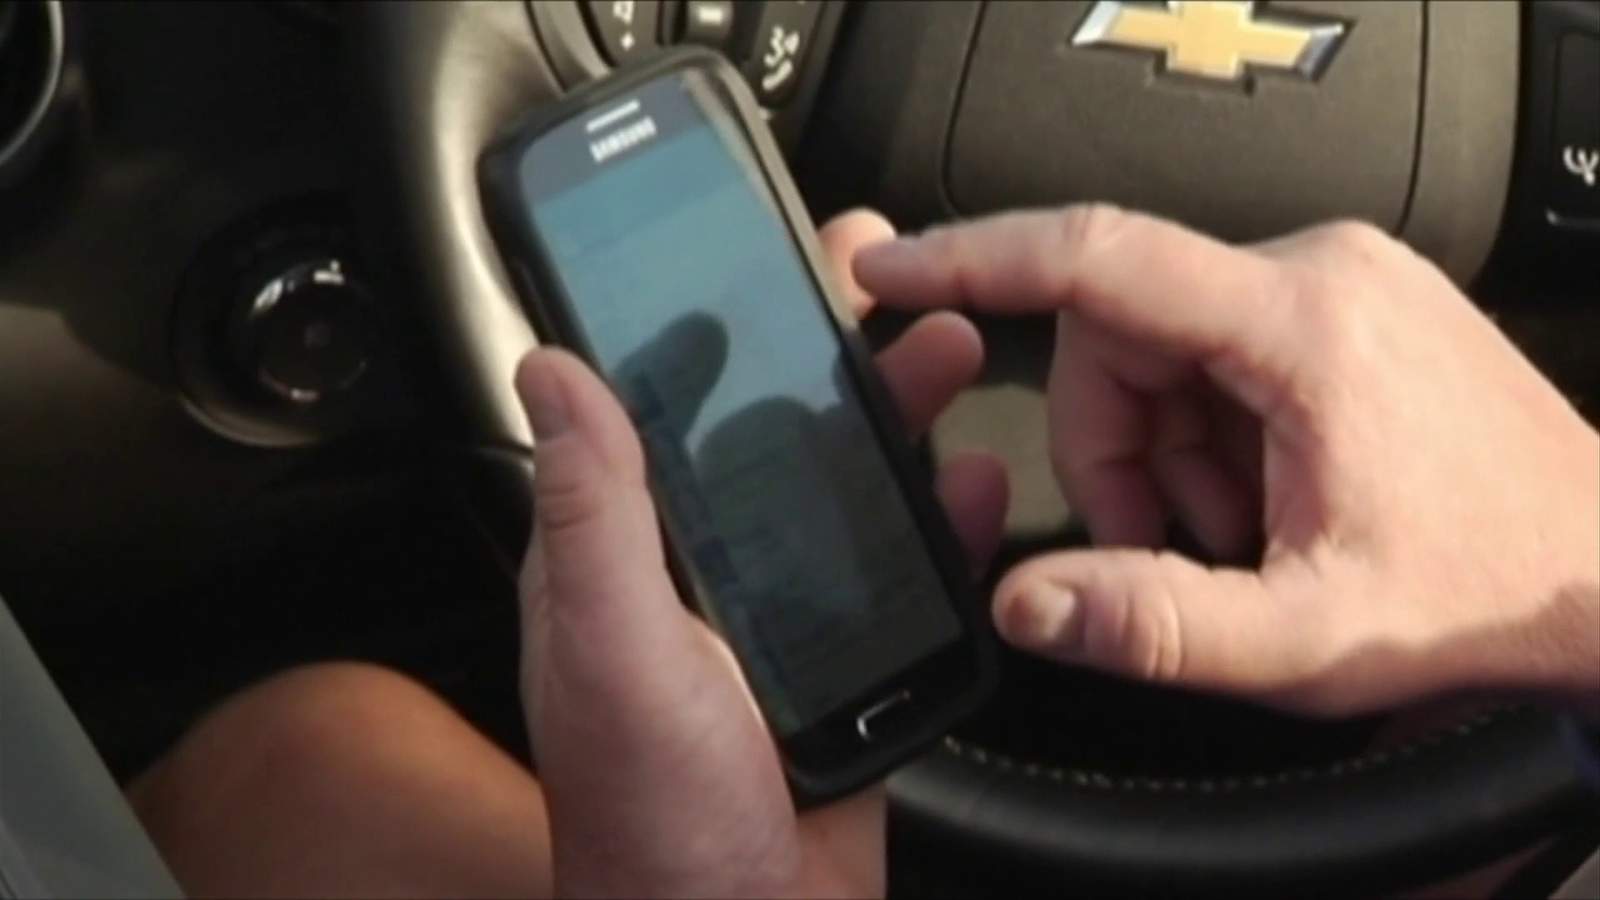 Virginia governor issues reminder as new distracted driving law starts next year